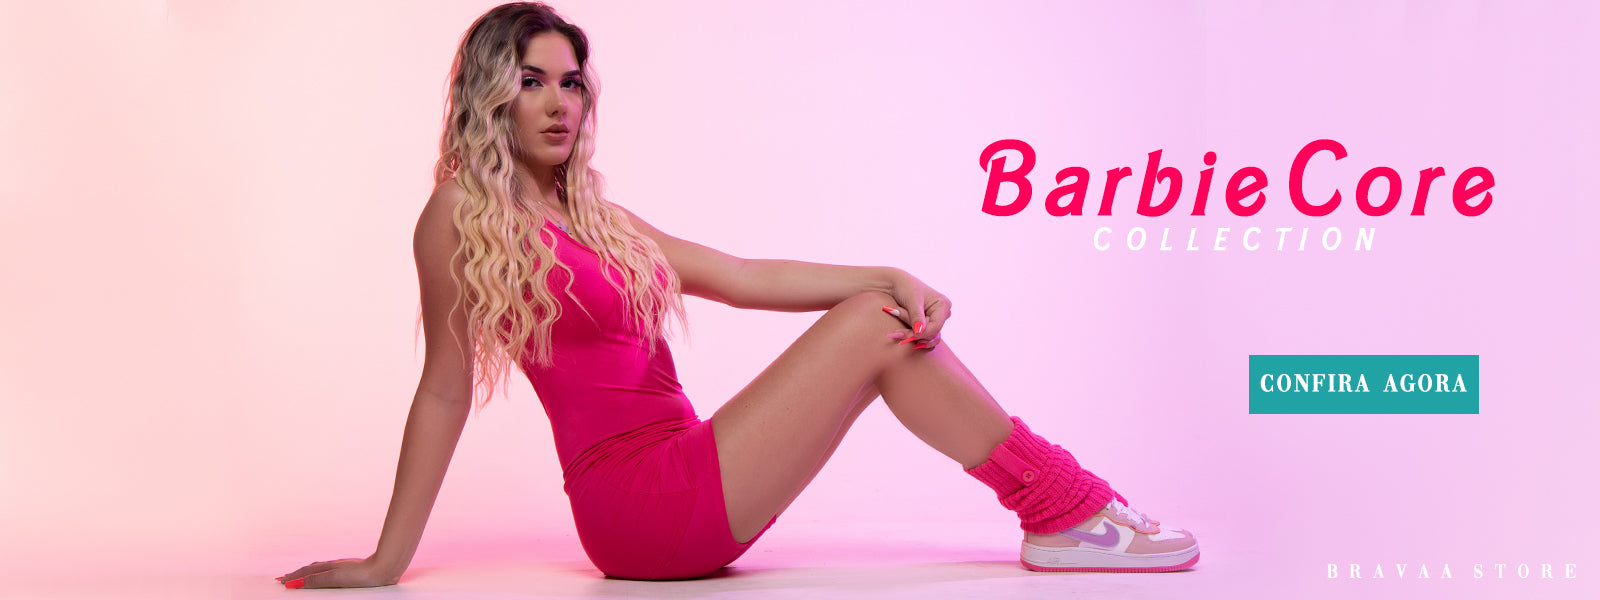 BarbieCore | Collection